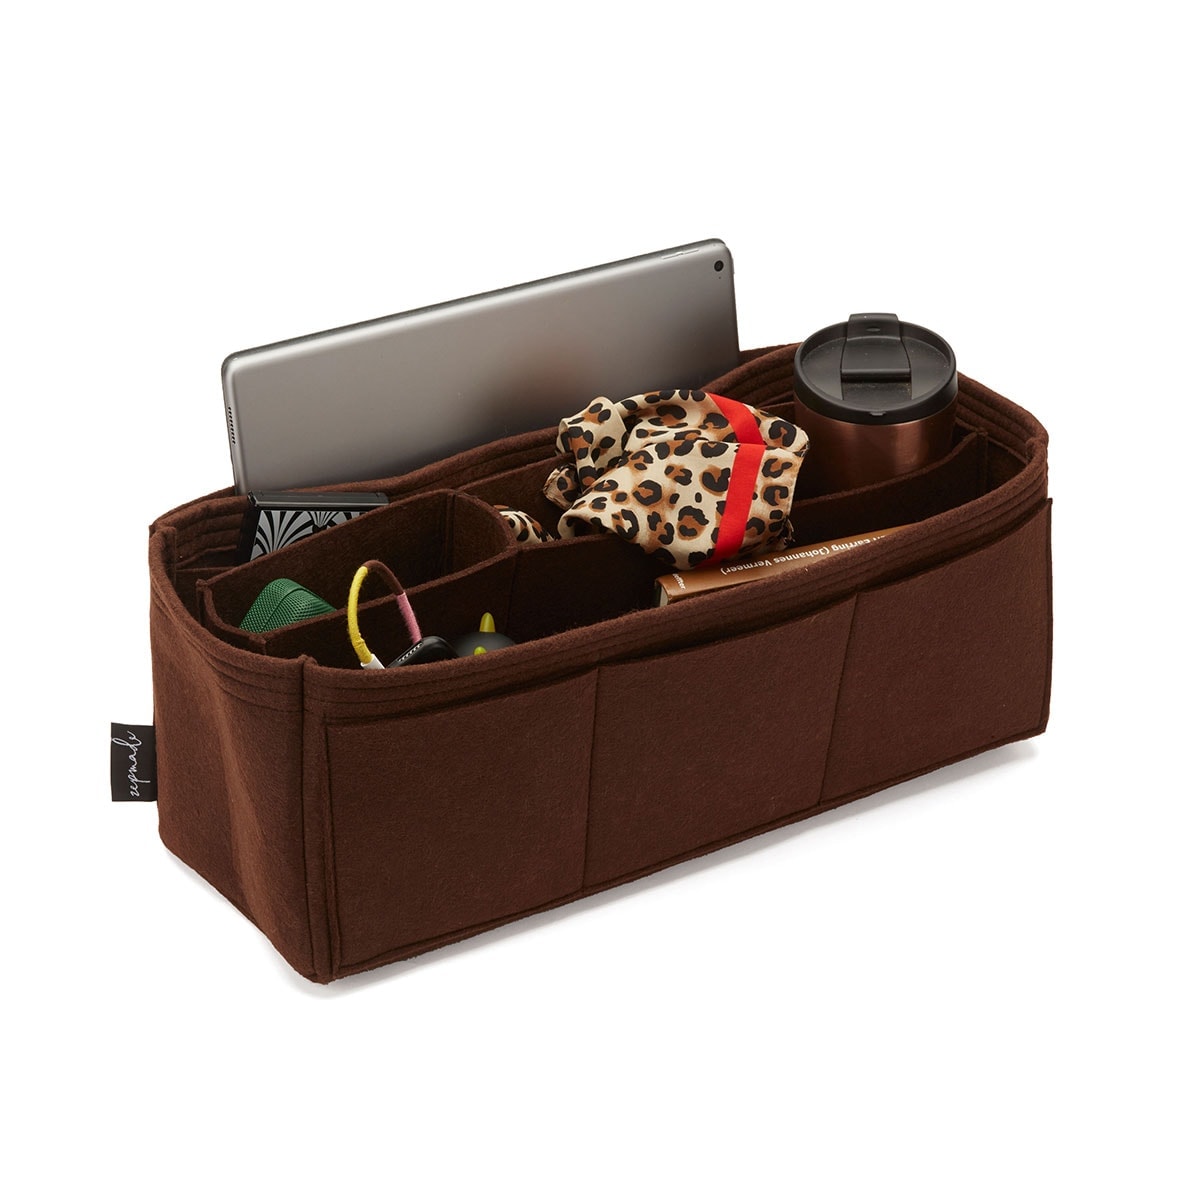 Louis Vuitton Onthego Purse Organizer Insert, Bag Organizer with Middle  Compartment and Exterior Pockets